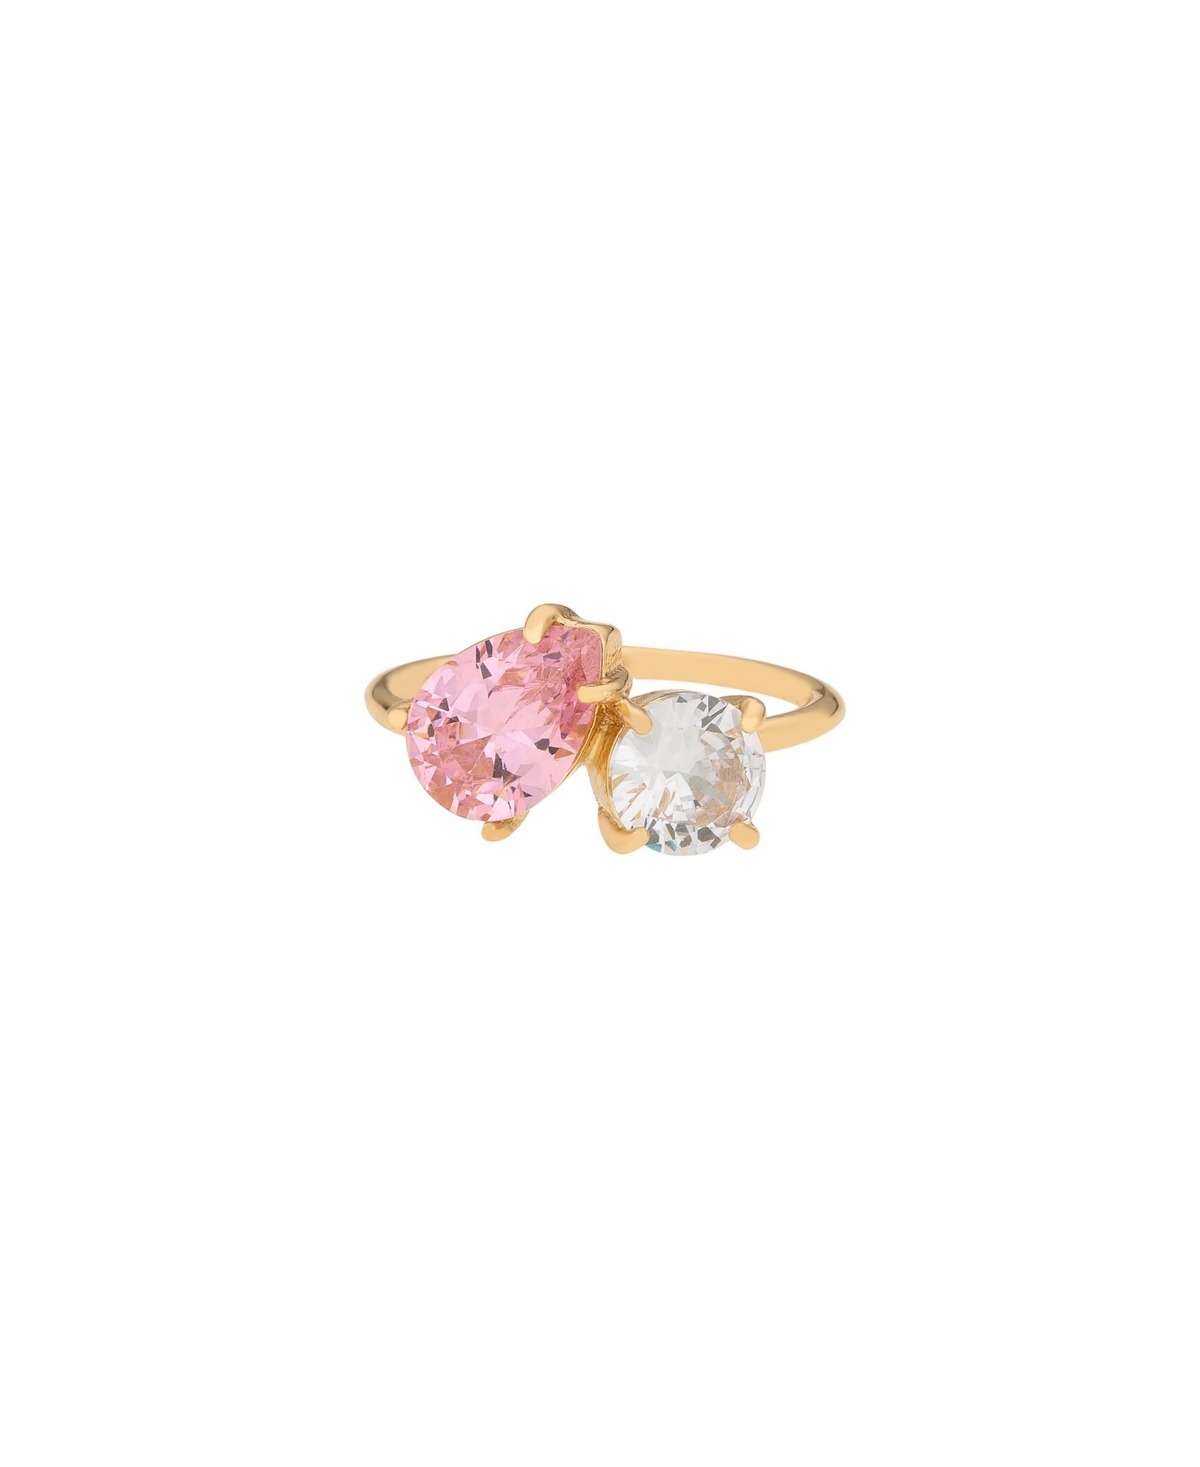 Ettika 18k Gold Plated Brass Colored Topaz Cubic Zirconia Ring In Pink